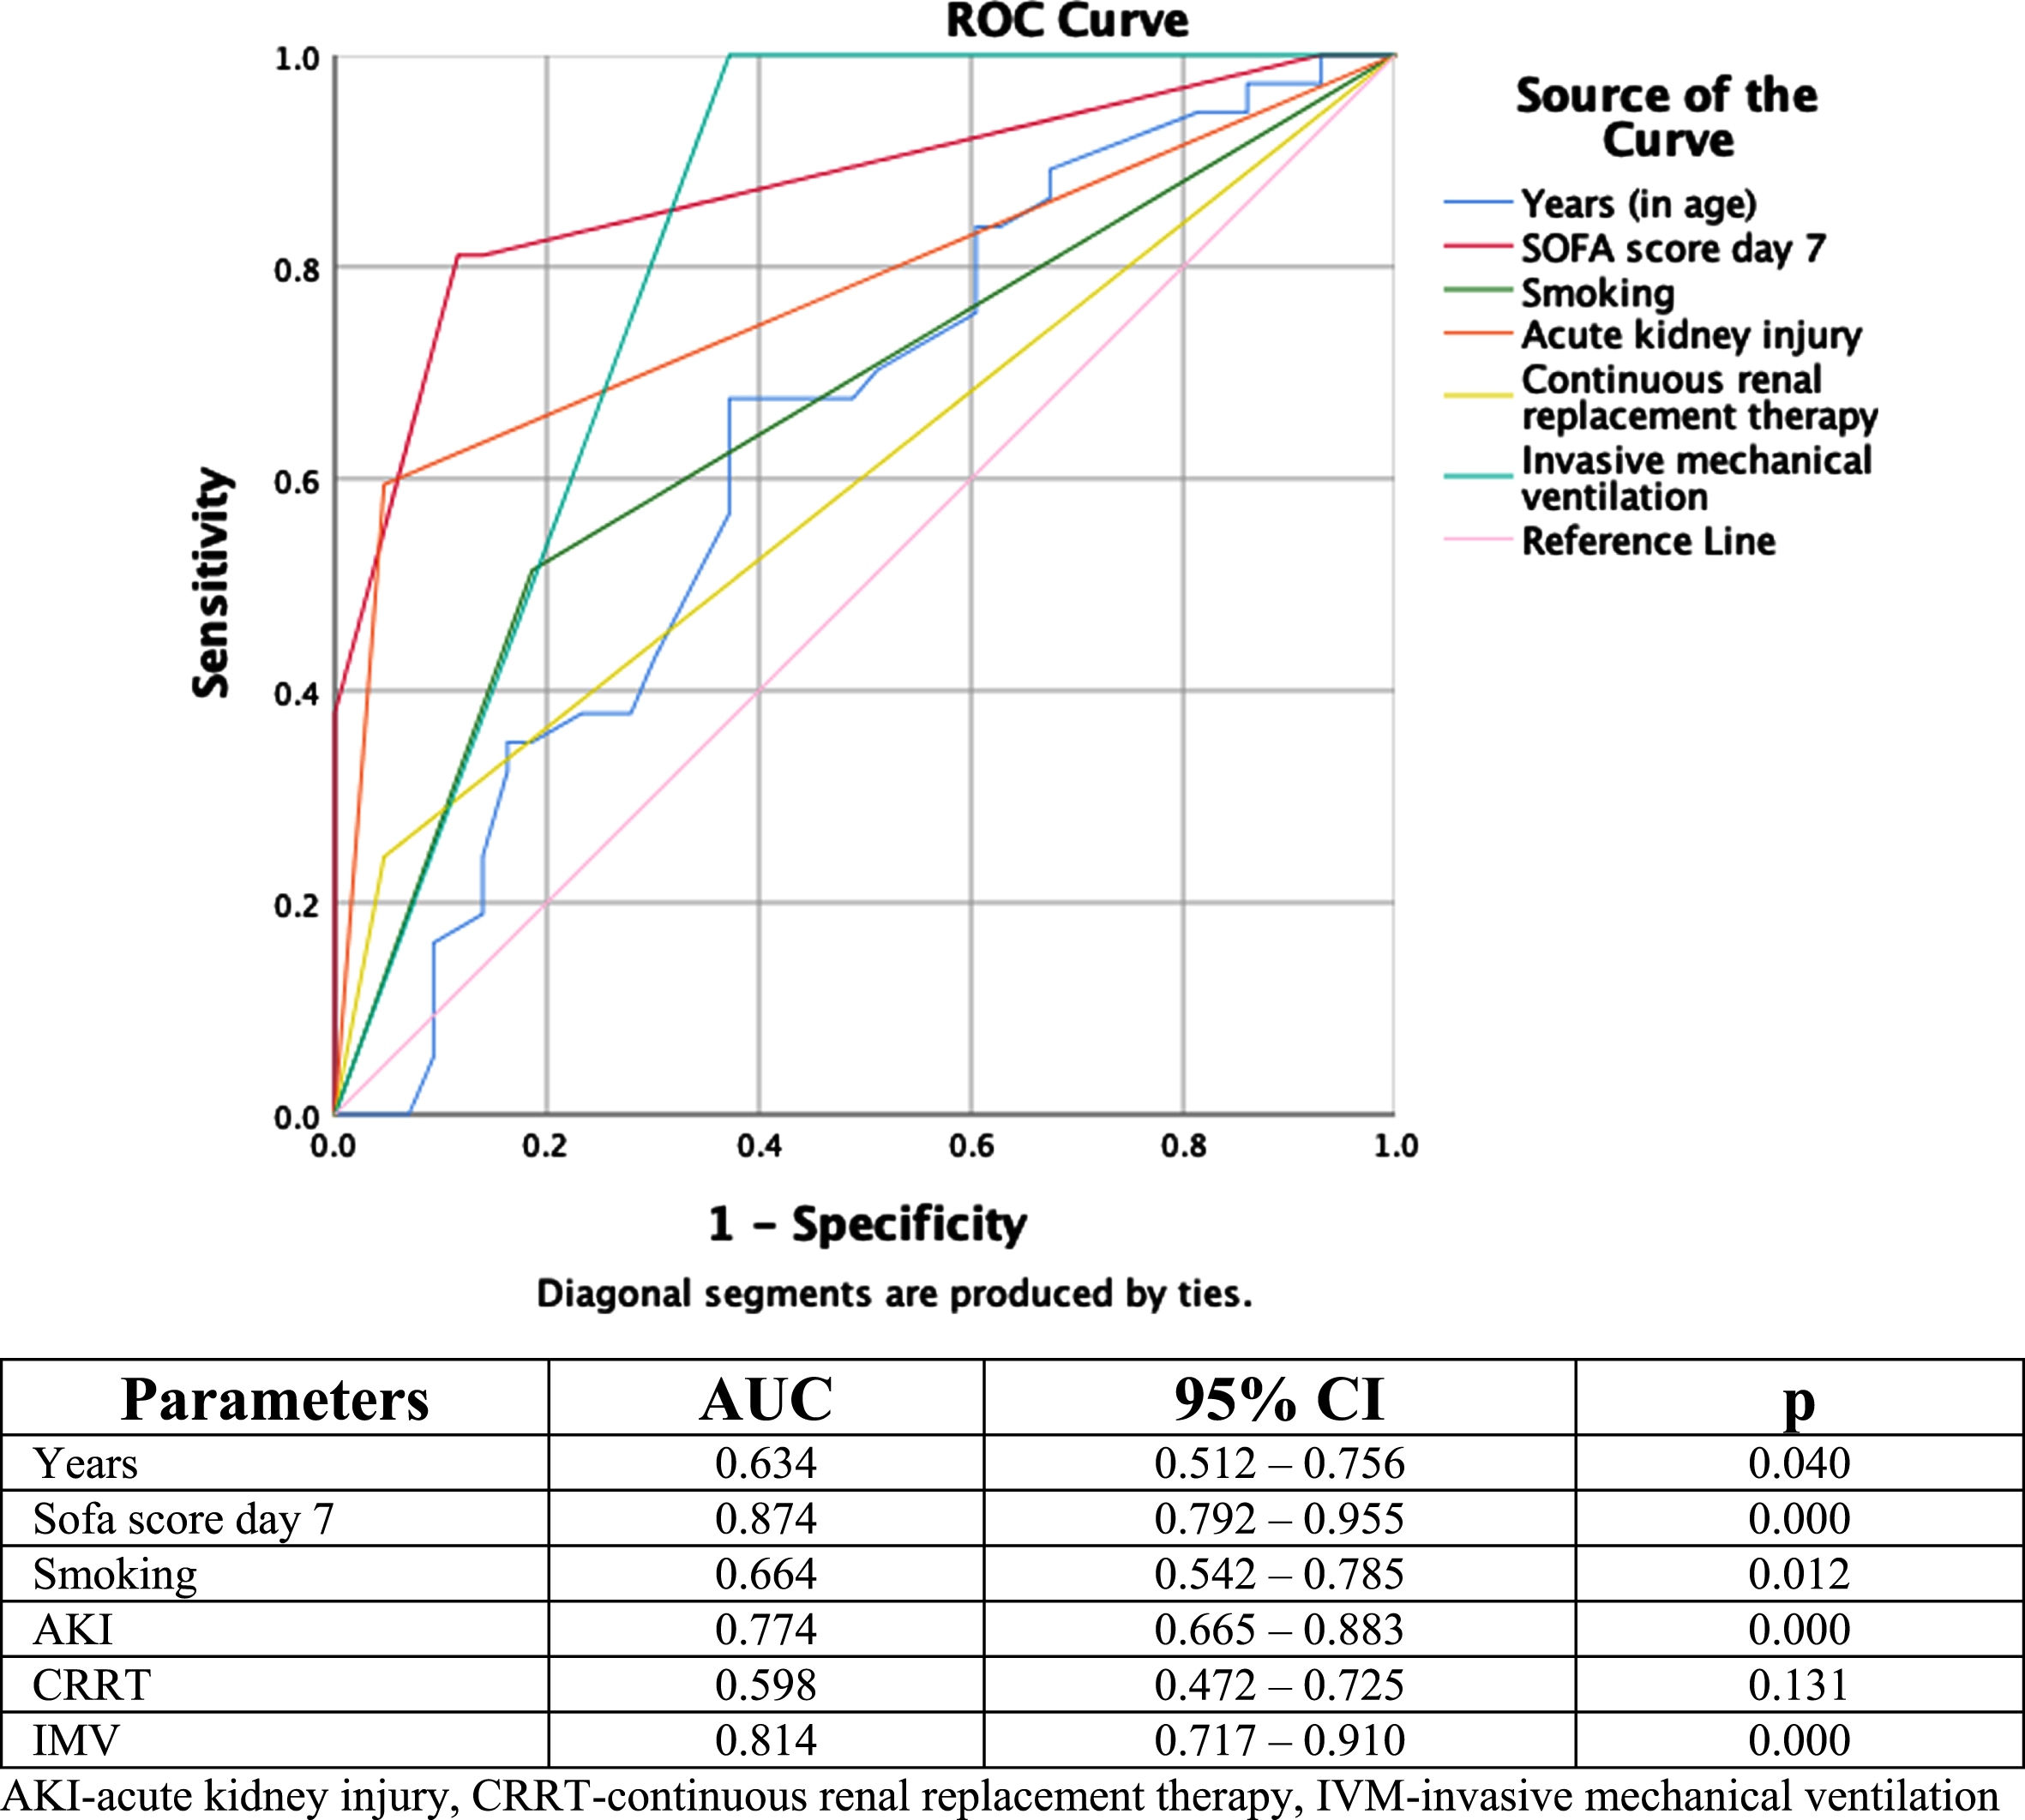 Receiver-operating characteristic curves for significant demographical and clinical parameters in the prediction of mortality.